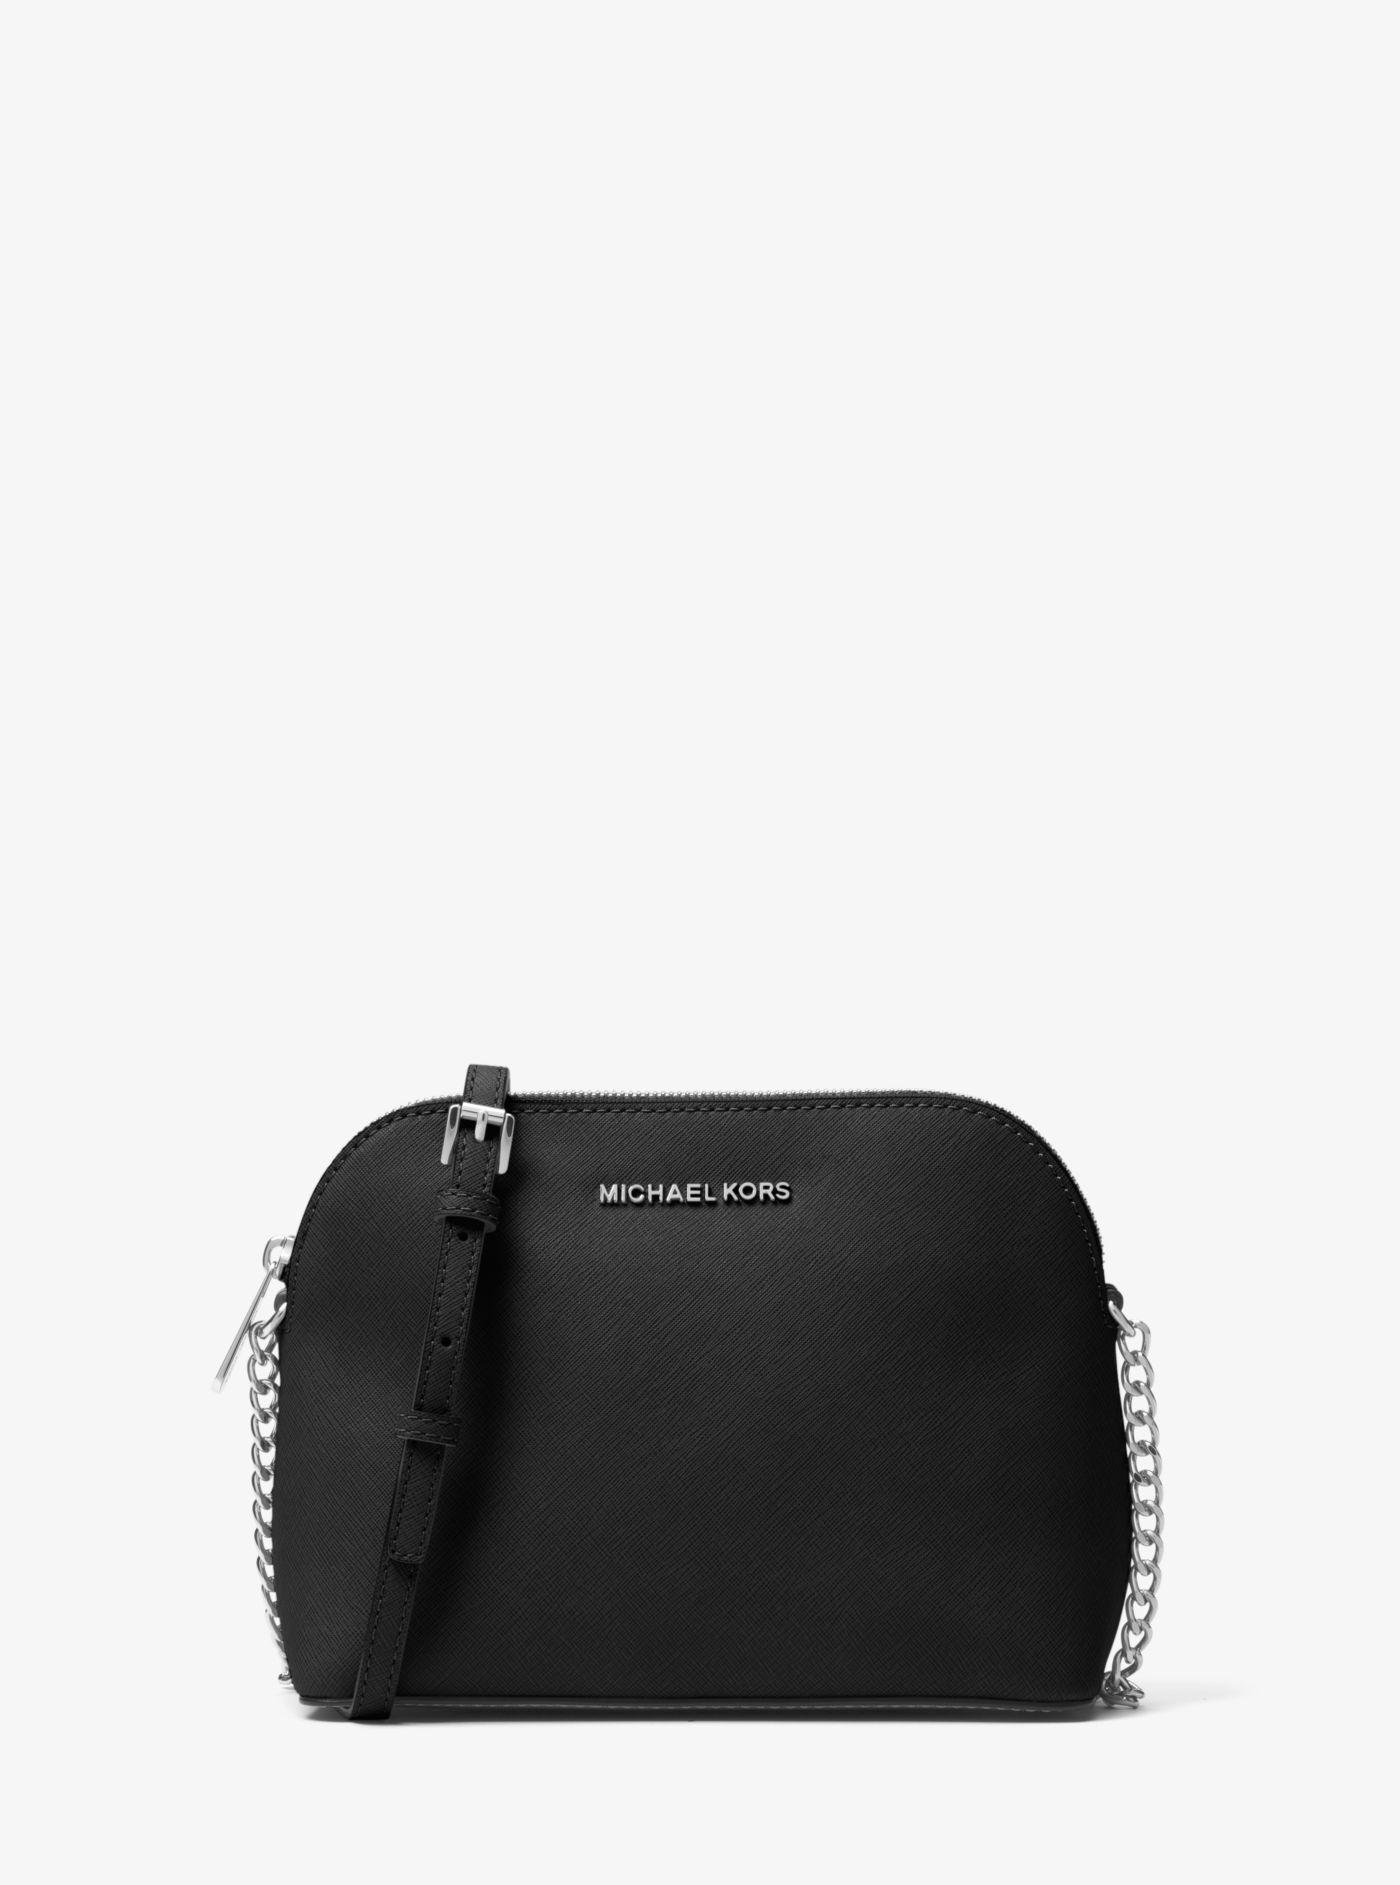 Lyst - Michael Kors Cindy Large Saffiano Leather Crossbody in Black